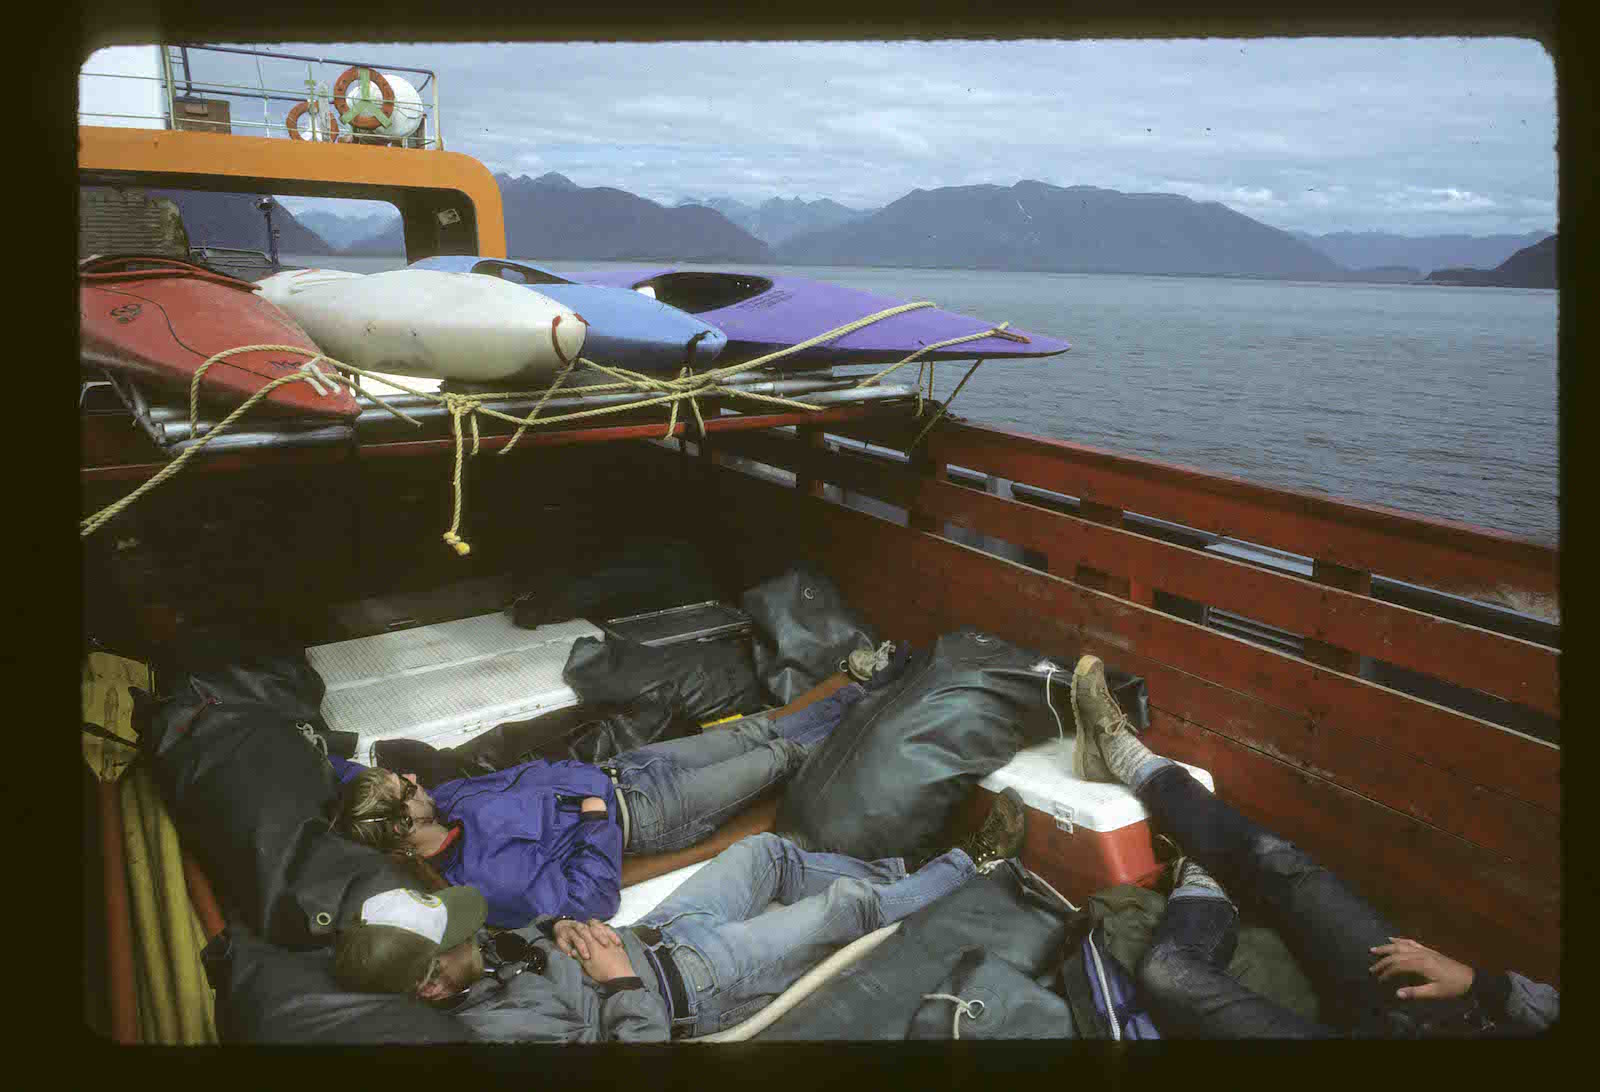 Our truck on the ferry from Chaiten to Chilhoe after the trip. Dan Bolster and Brad Lord. Note the 1980 era river footwear | Photo: Peter Fox